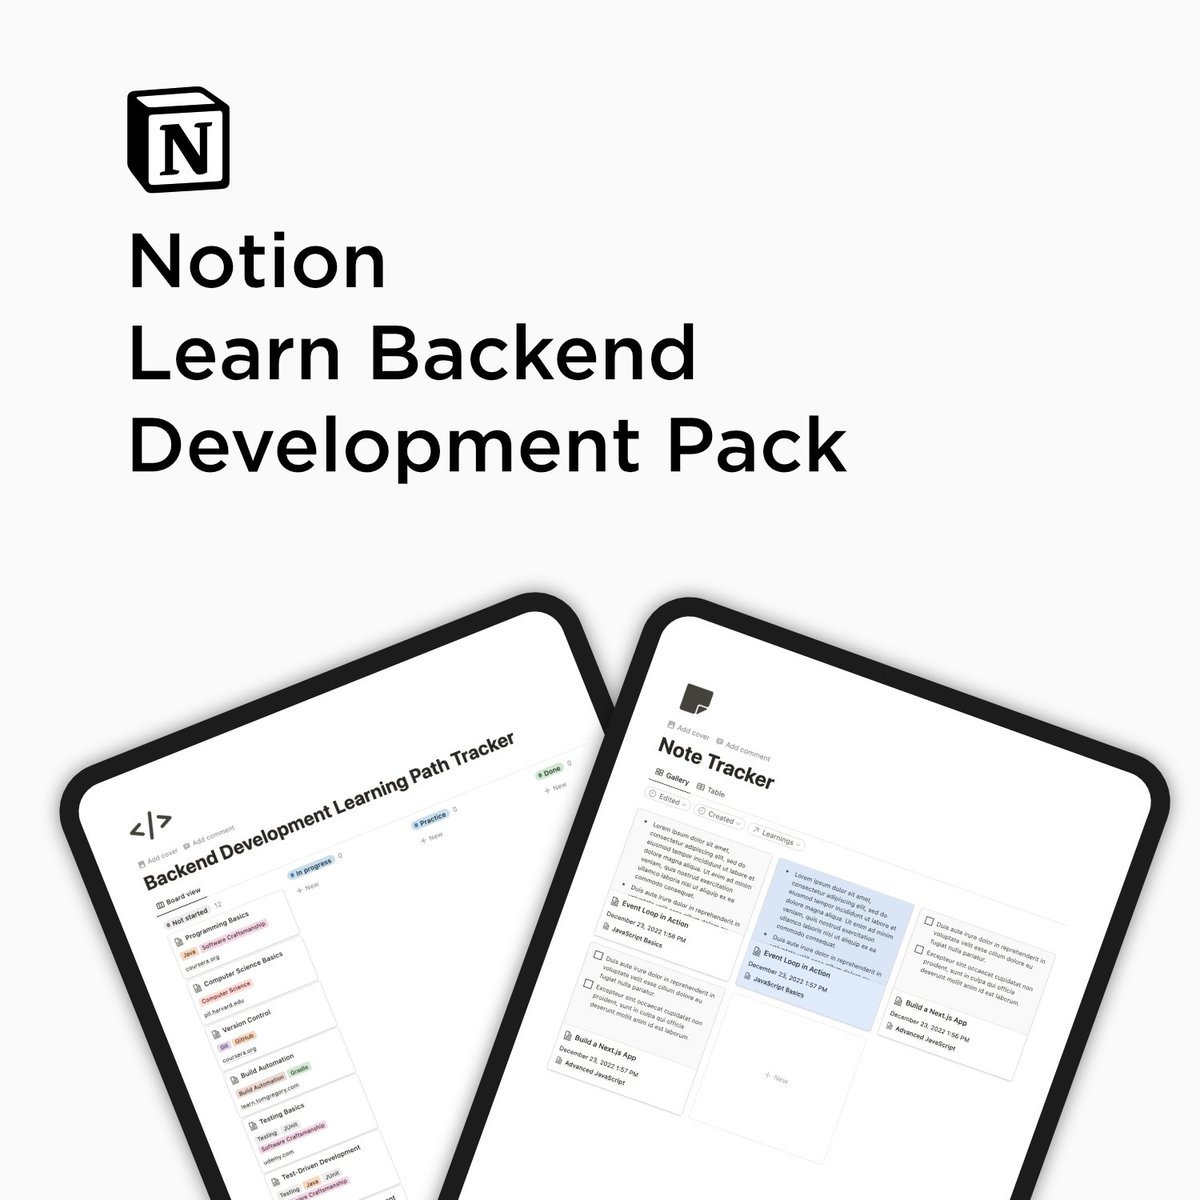 I interviewed over 50 back-end engineers in the last 2 years. I created a Notion based 'Learn Backend Development Pack' that contains a learning path to become a backend dev based on free resources. Retweet and reply with 'free' and I'll DM it to you. (need to follow)